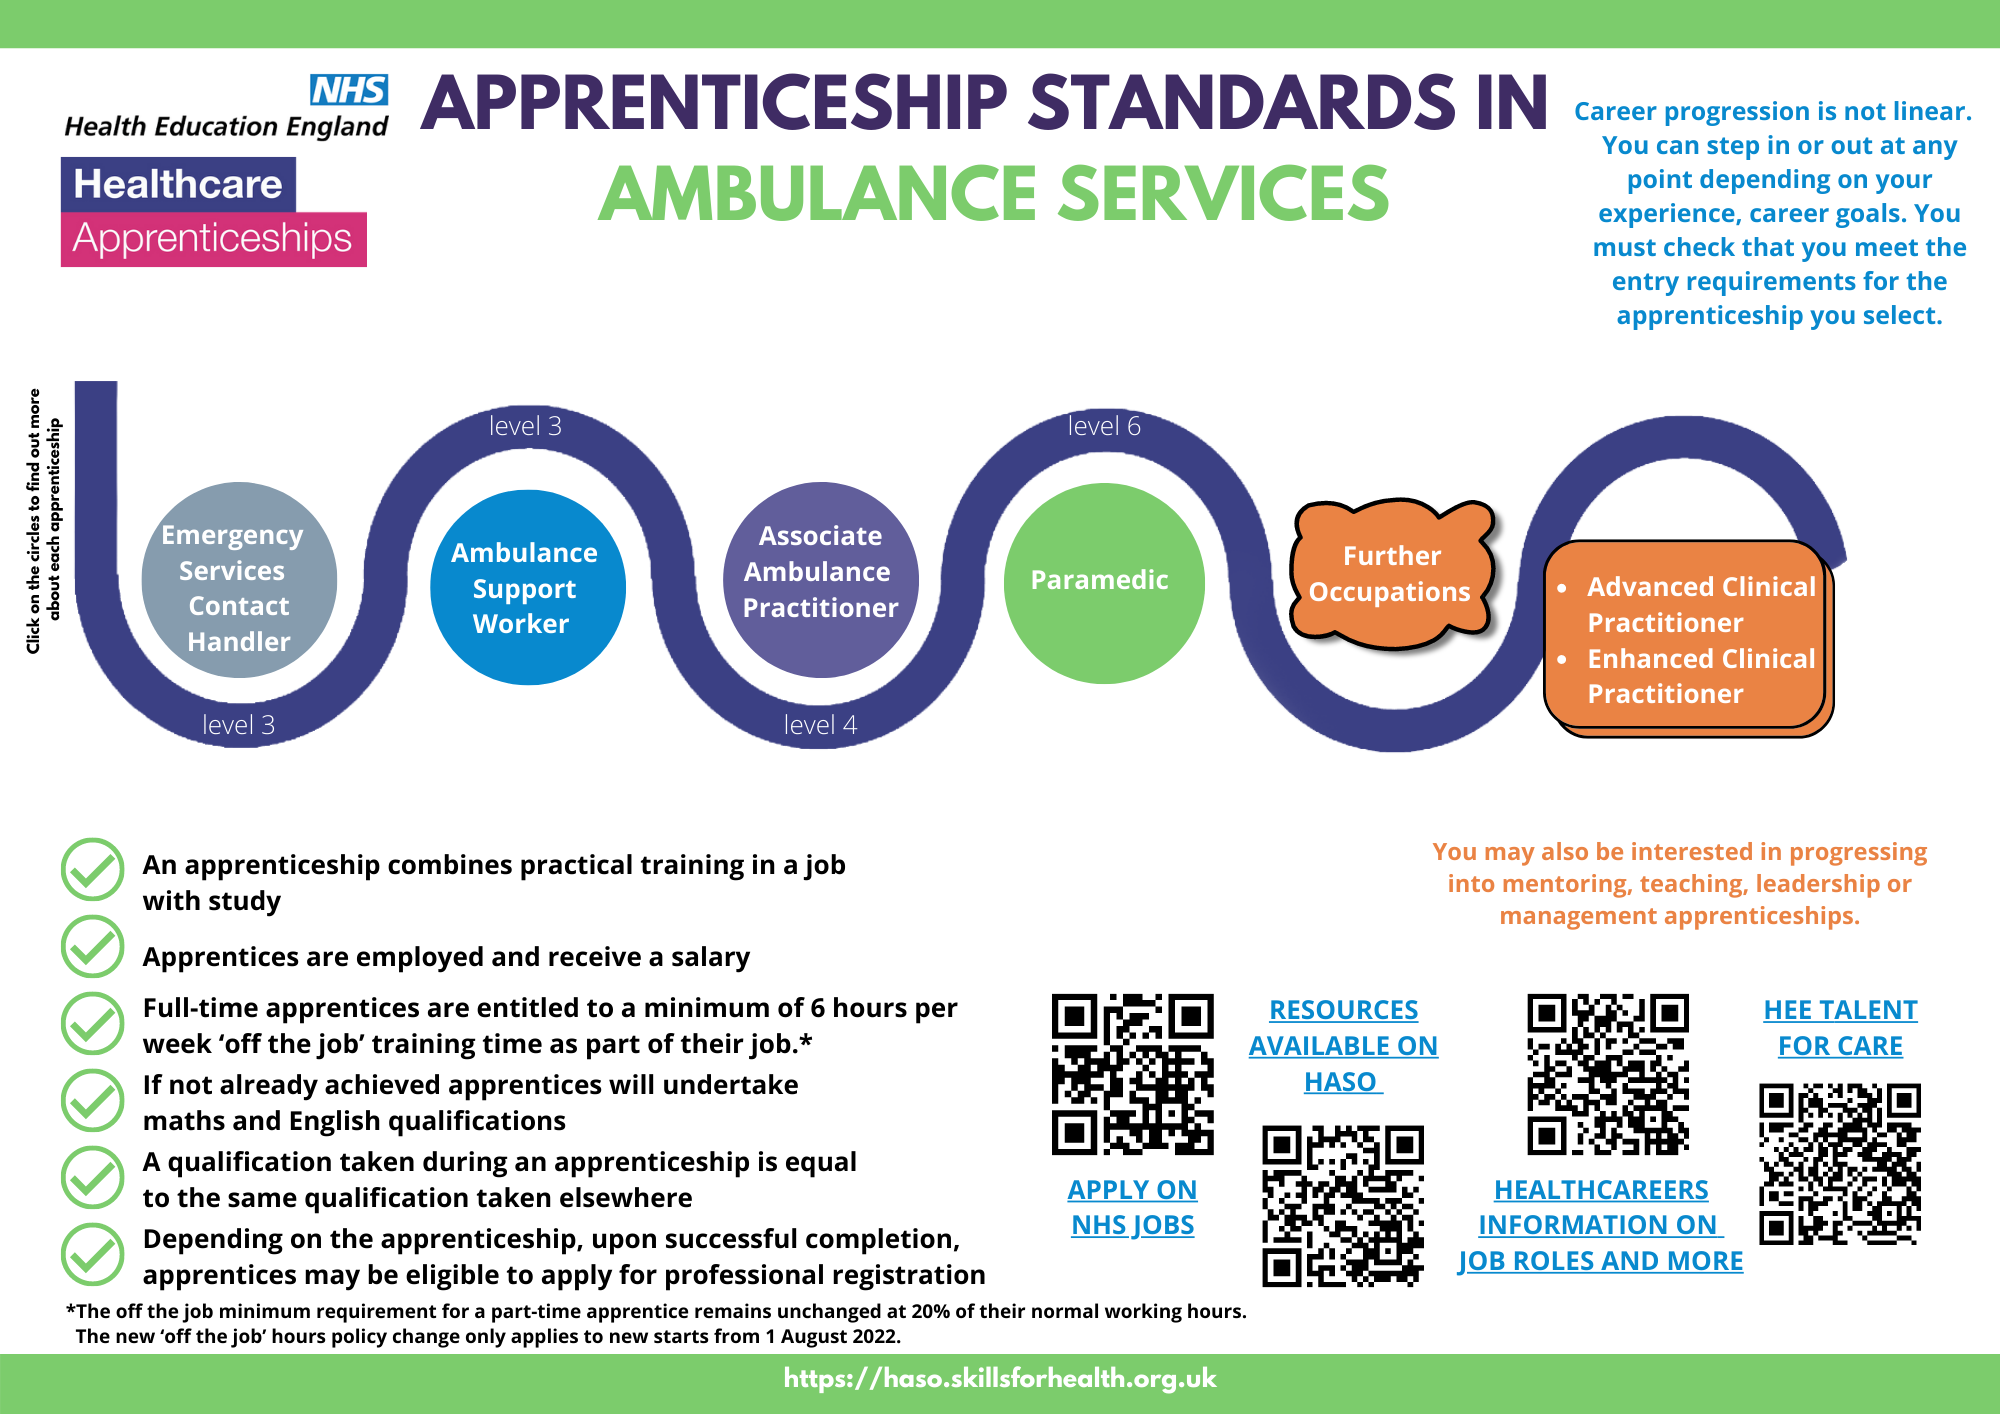 Ambulance Services Apprenticeship Standards Factsheet - shows an overview of Ambulance Service related apprenticeships. These apprenticeships are also listed here: https://haso.skillsforhealth.org.uk/ambulance/ 